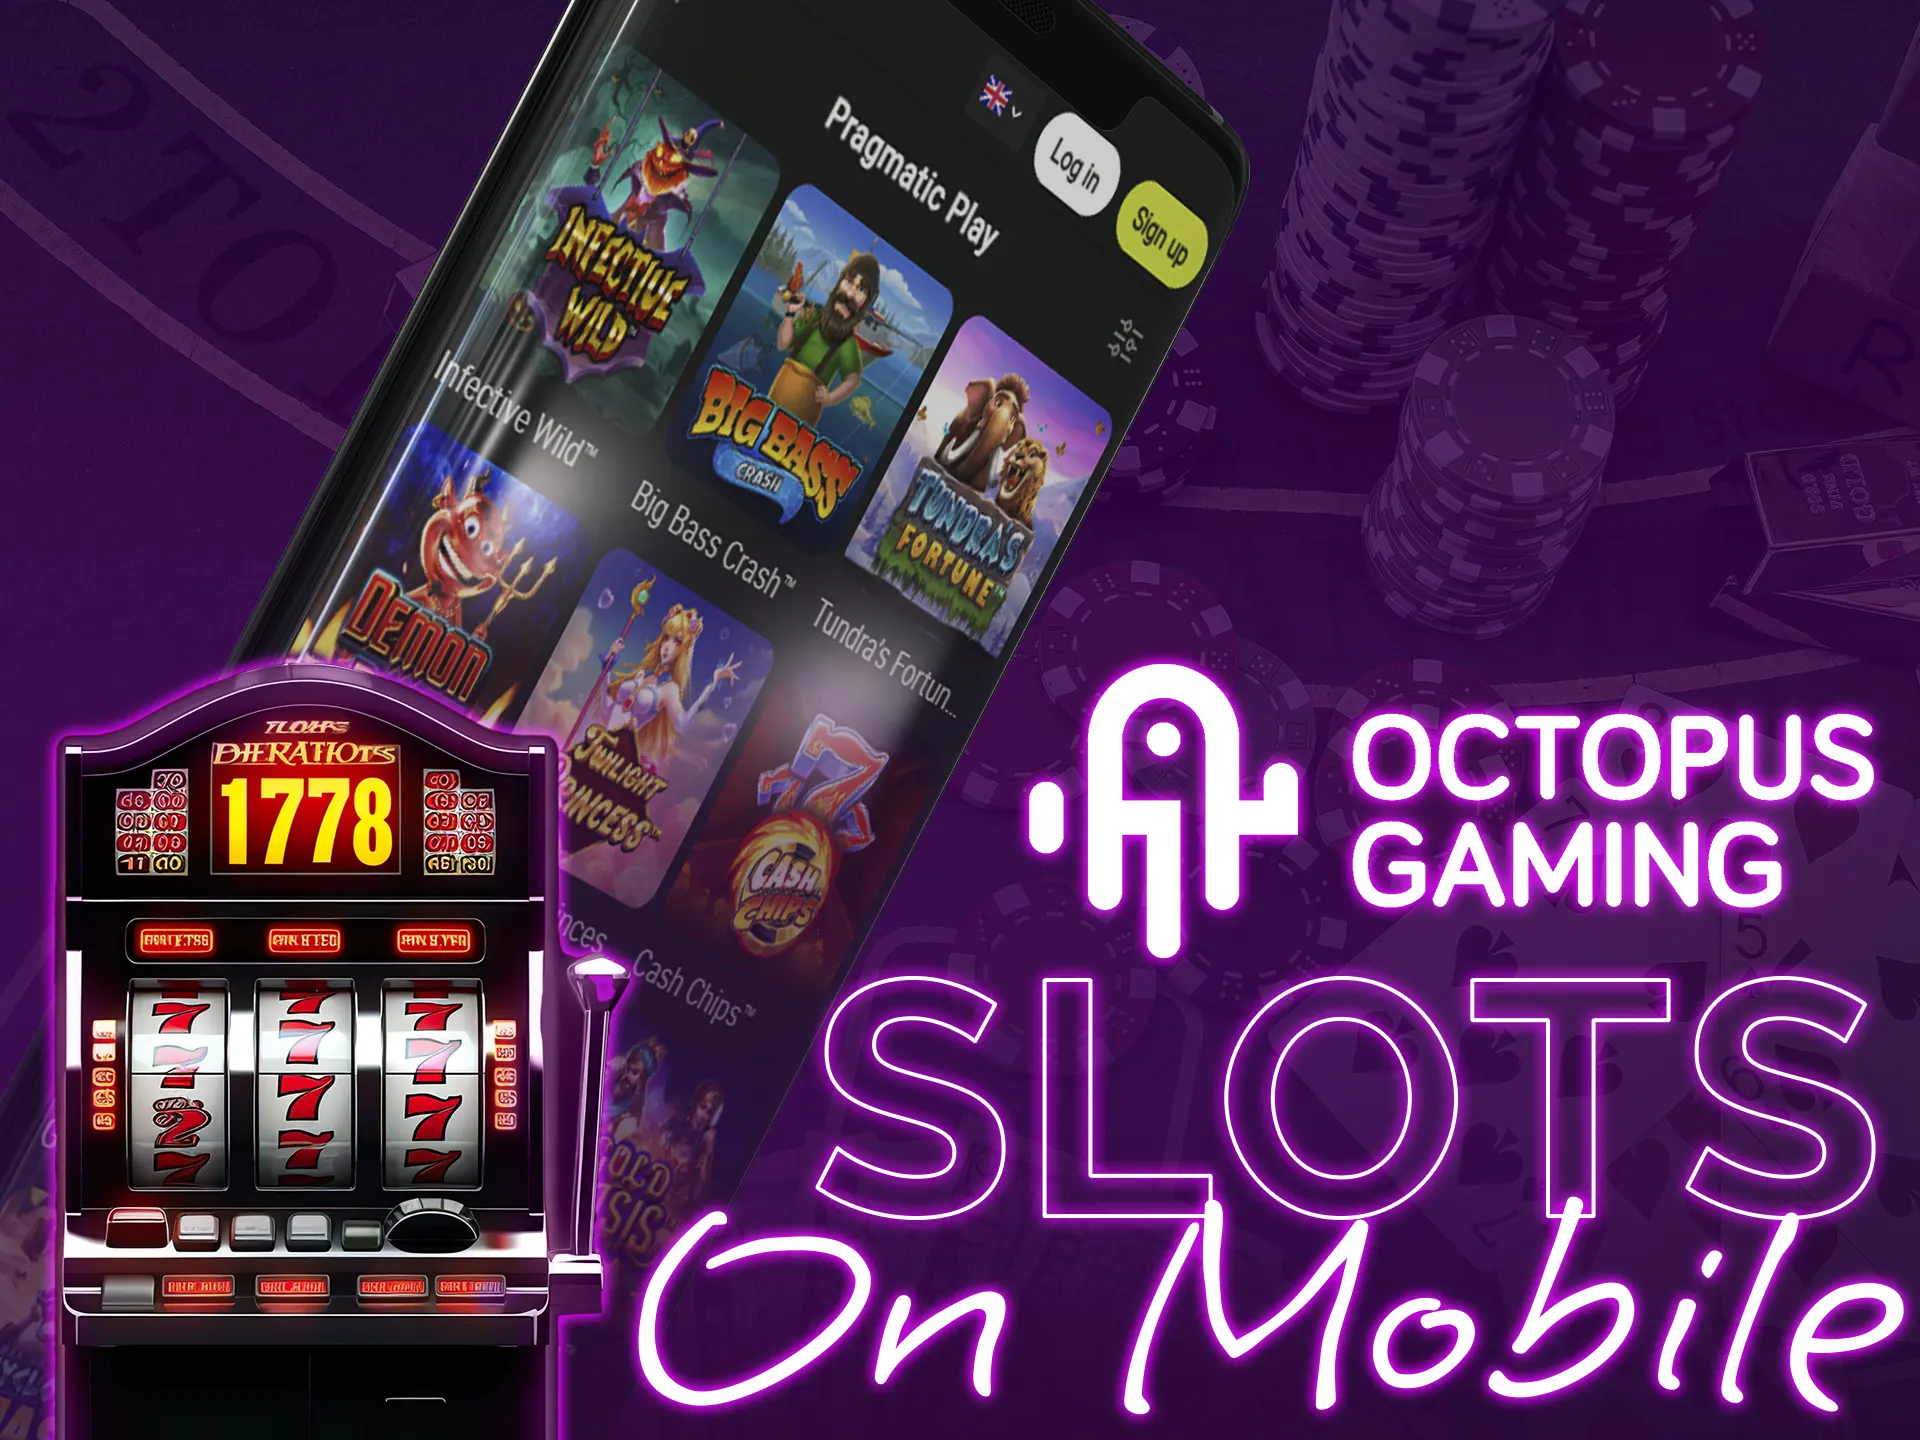 Take the opportunity to play Octopus Gaming slots from mobile!